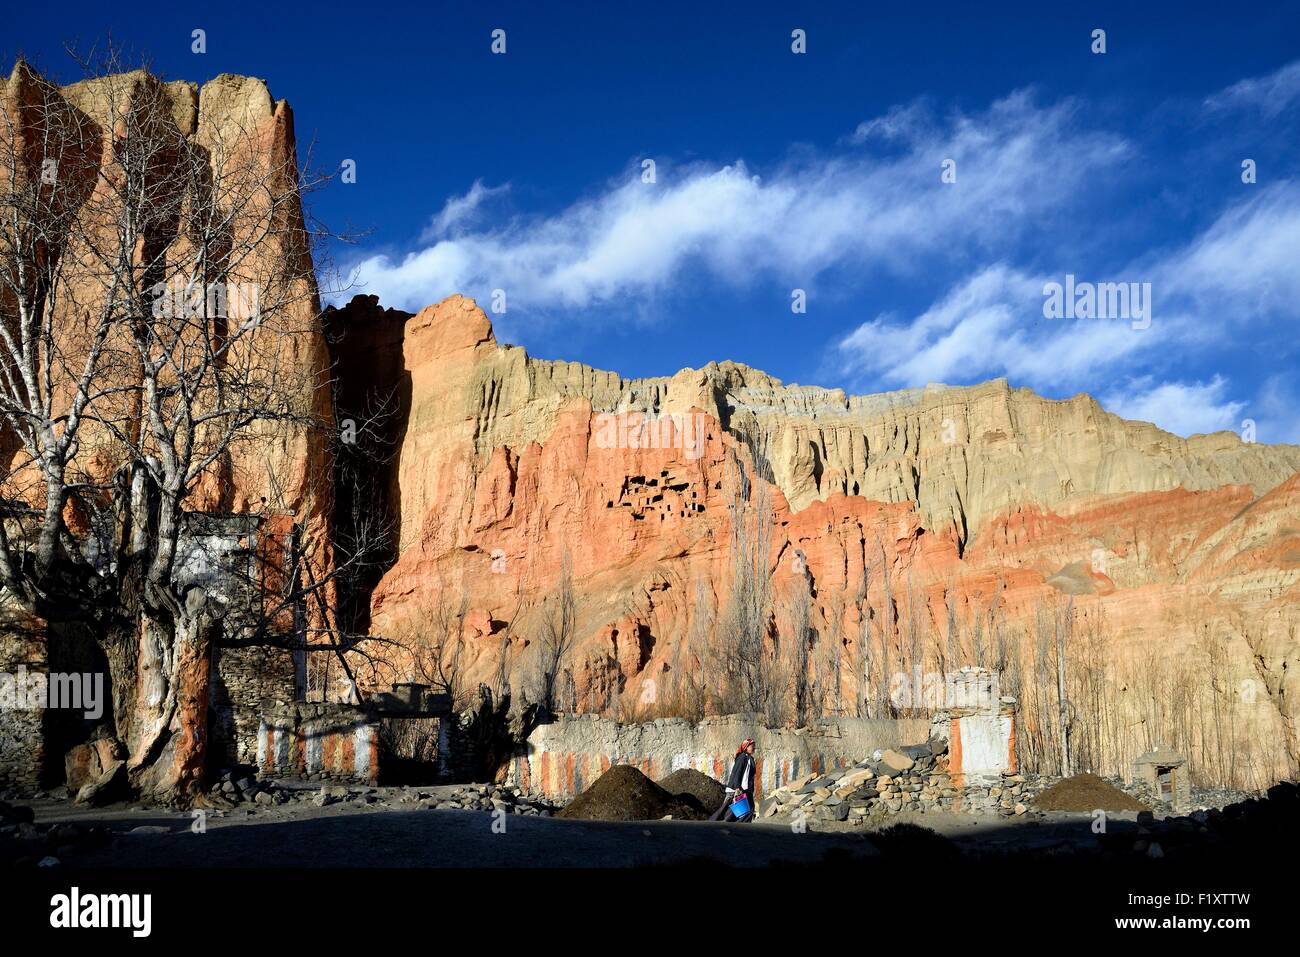 Nepal, Gandaki zone, Upper Mustang (near the border with Tibet), village of Dhakmar and red cliff with caves Stock Photo